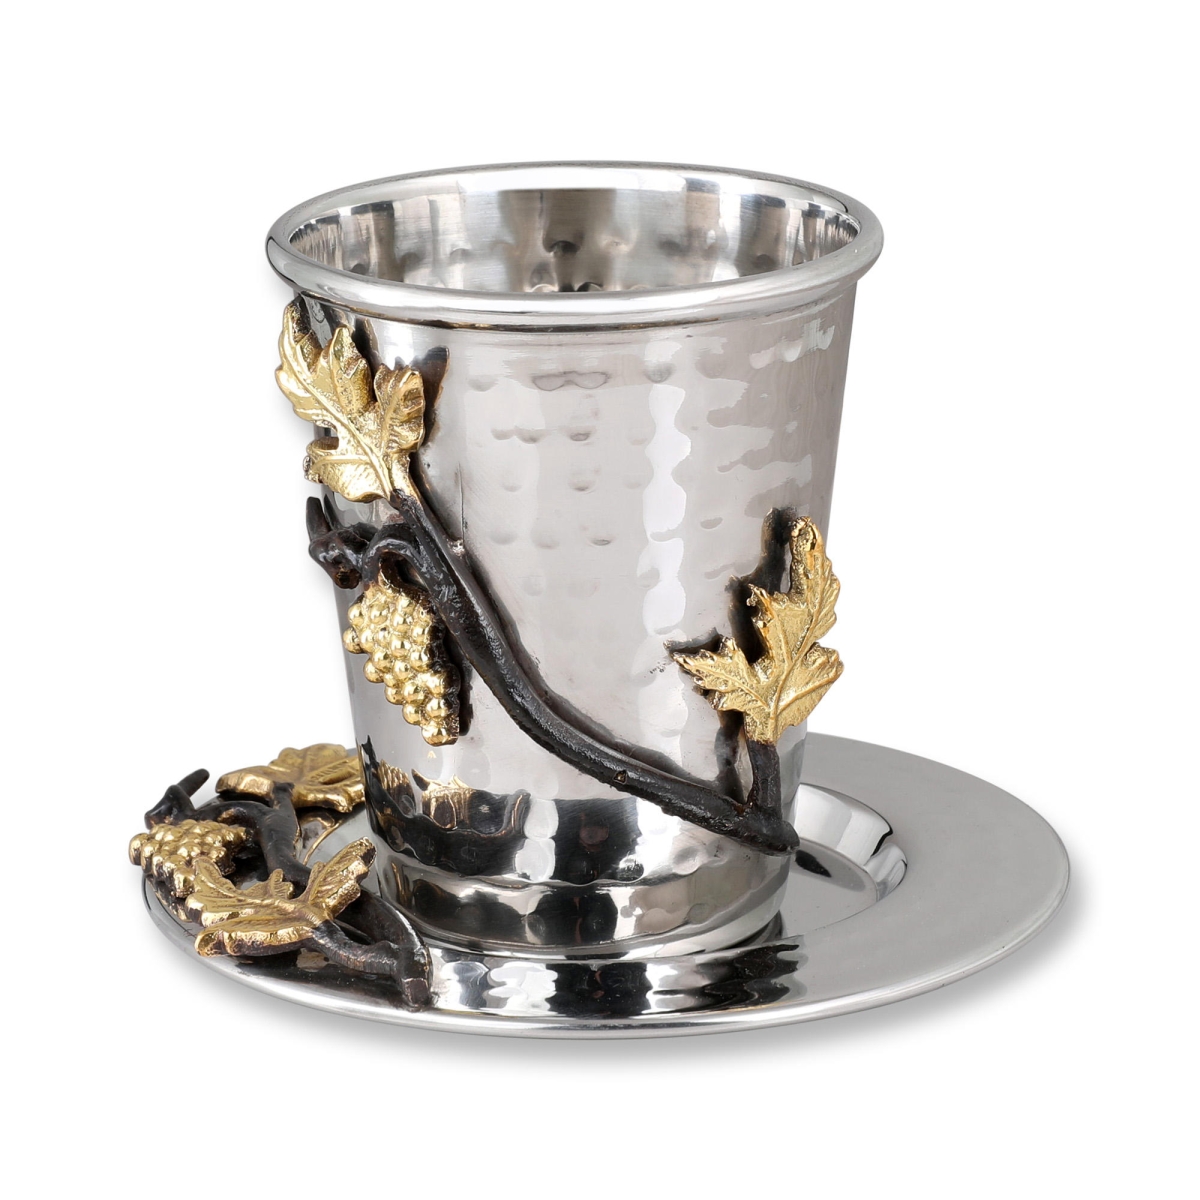 Yair Emanuel Stainless Steel Kiddush Cup and Plate - Grapes - 1